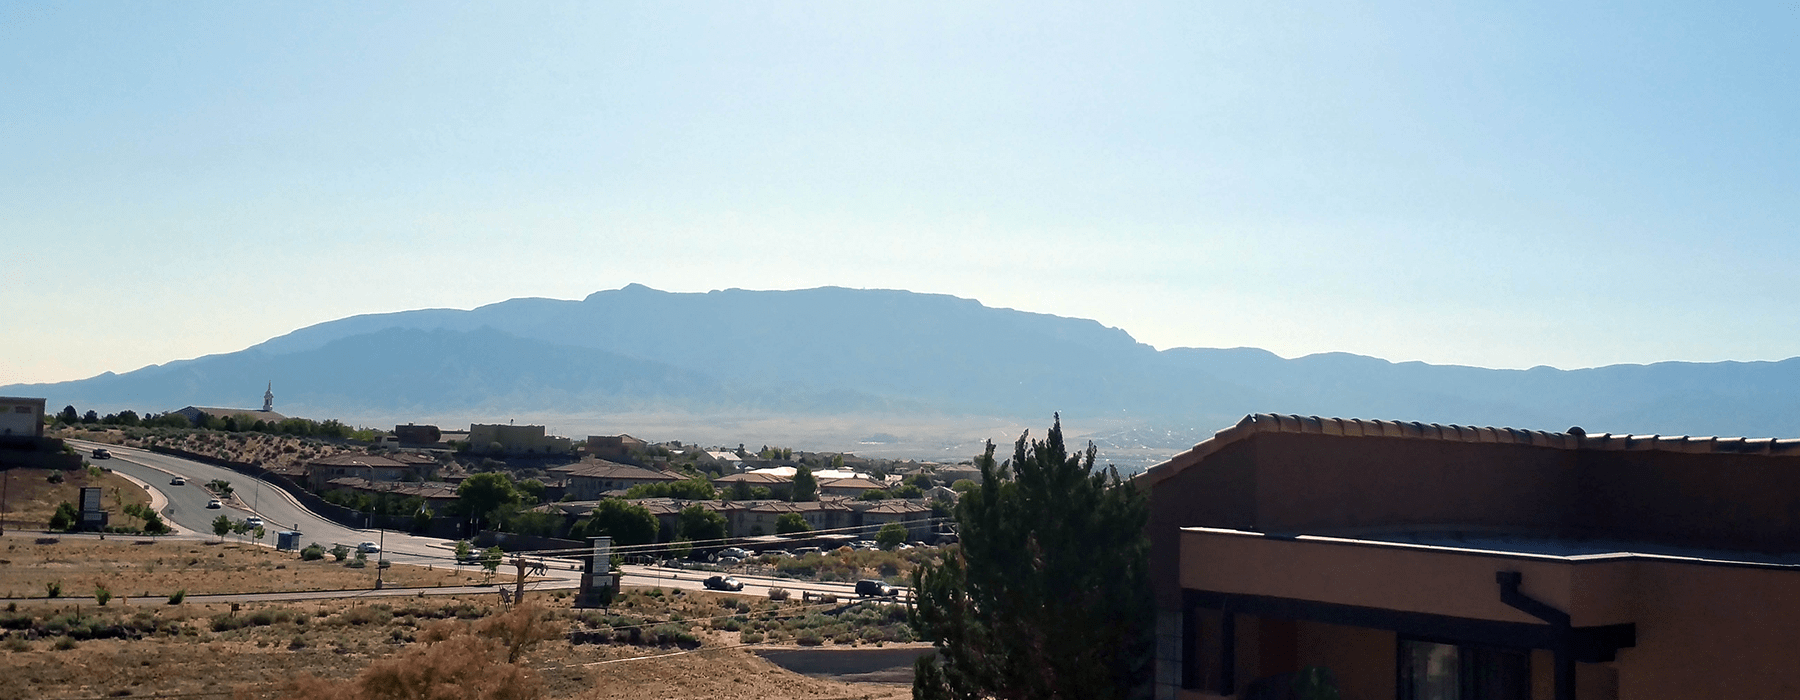 mountain view seen from property